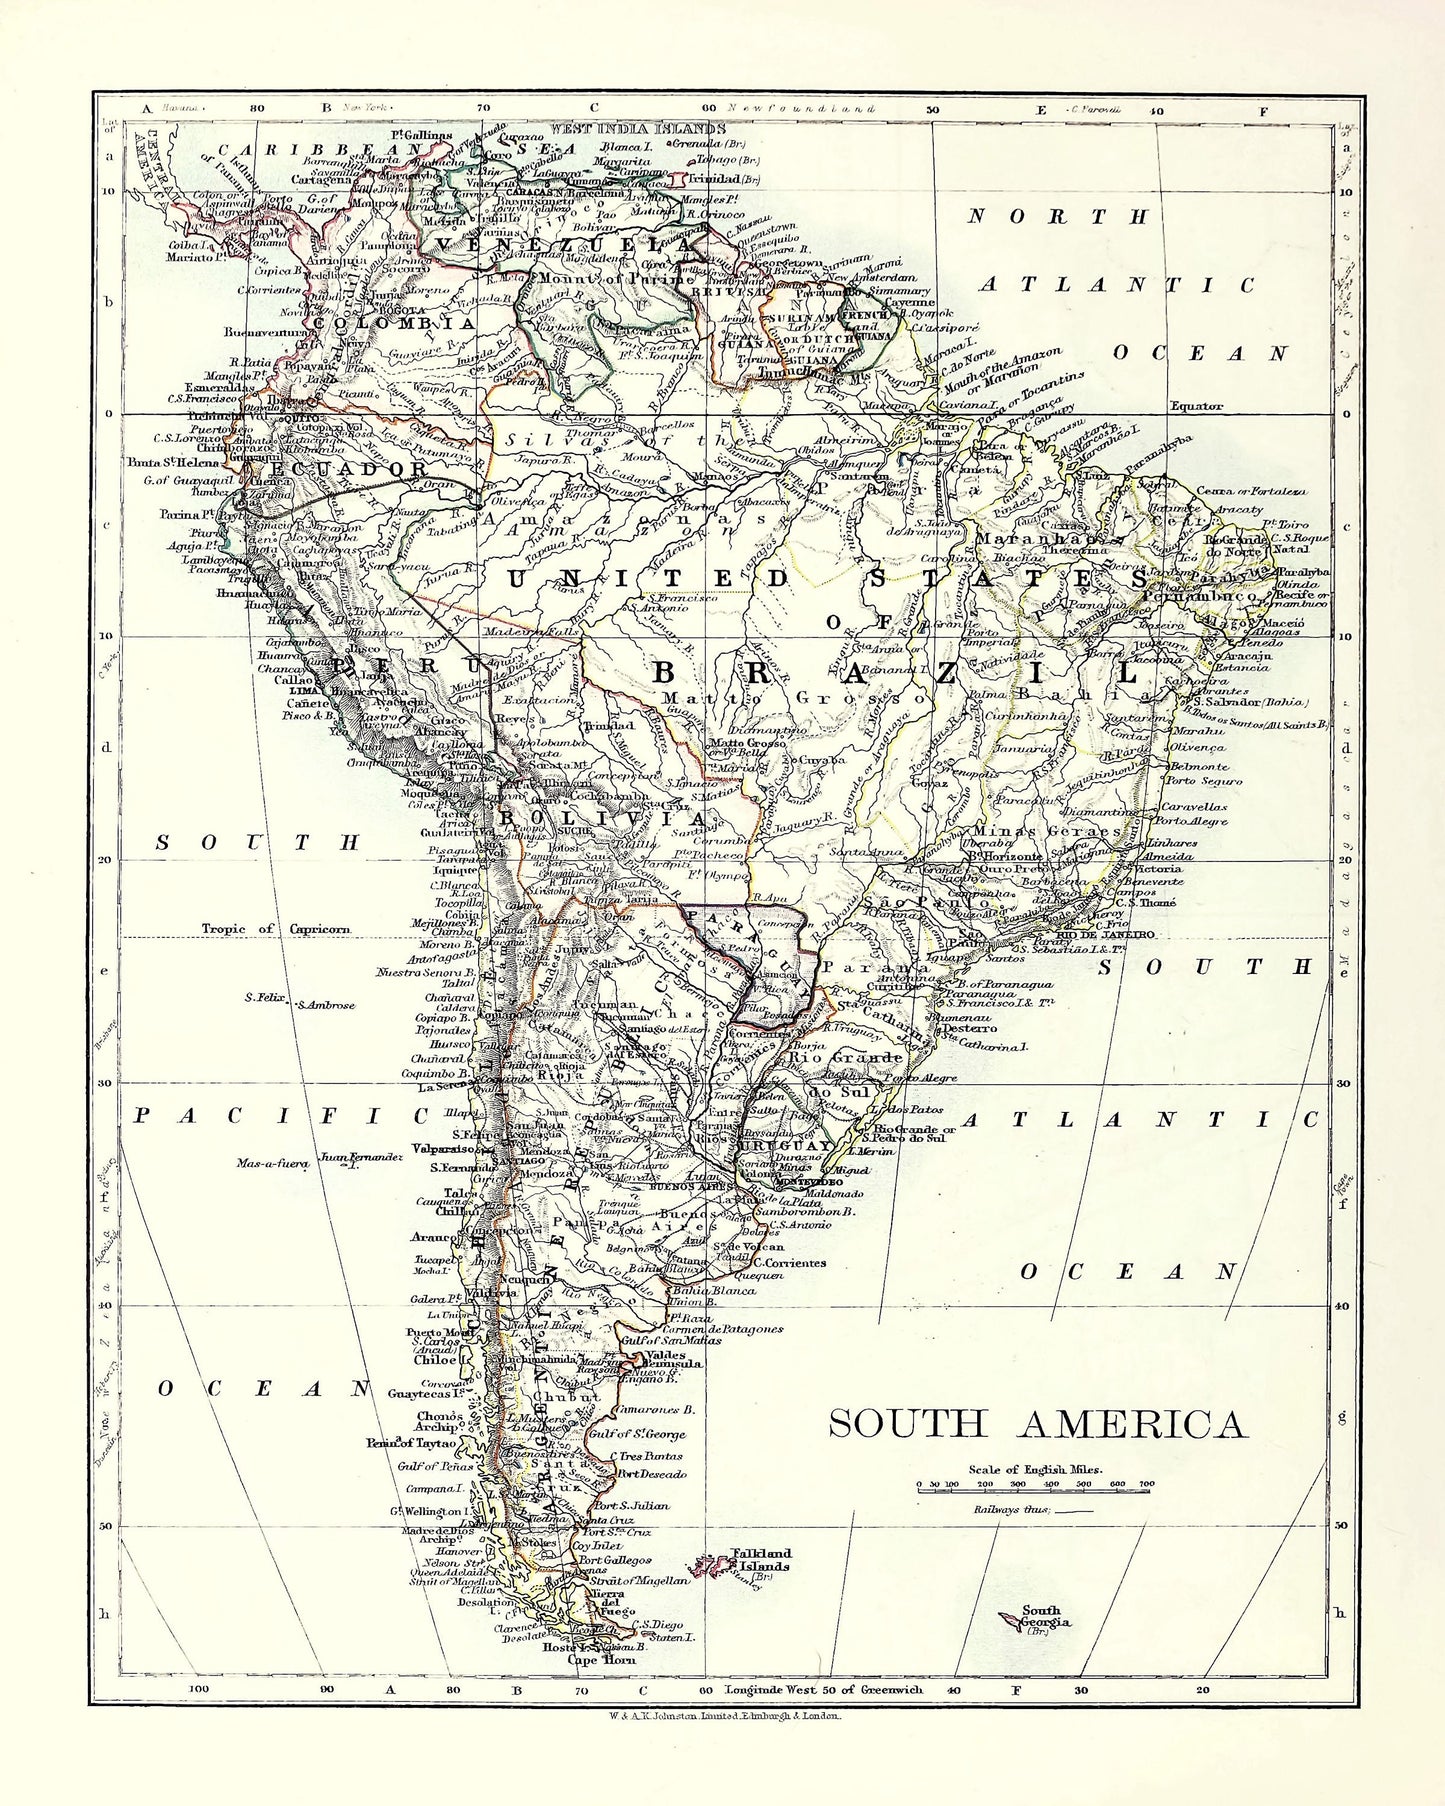 The World Wide Atlas of Modern Geography South & Central America [14 Images]